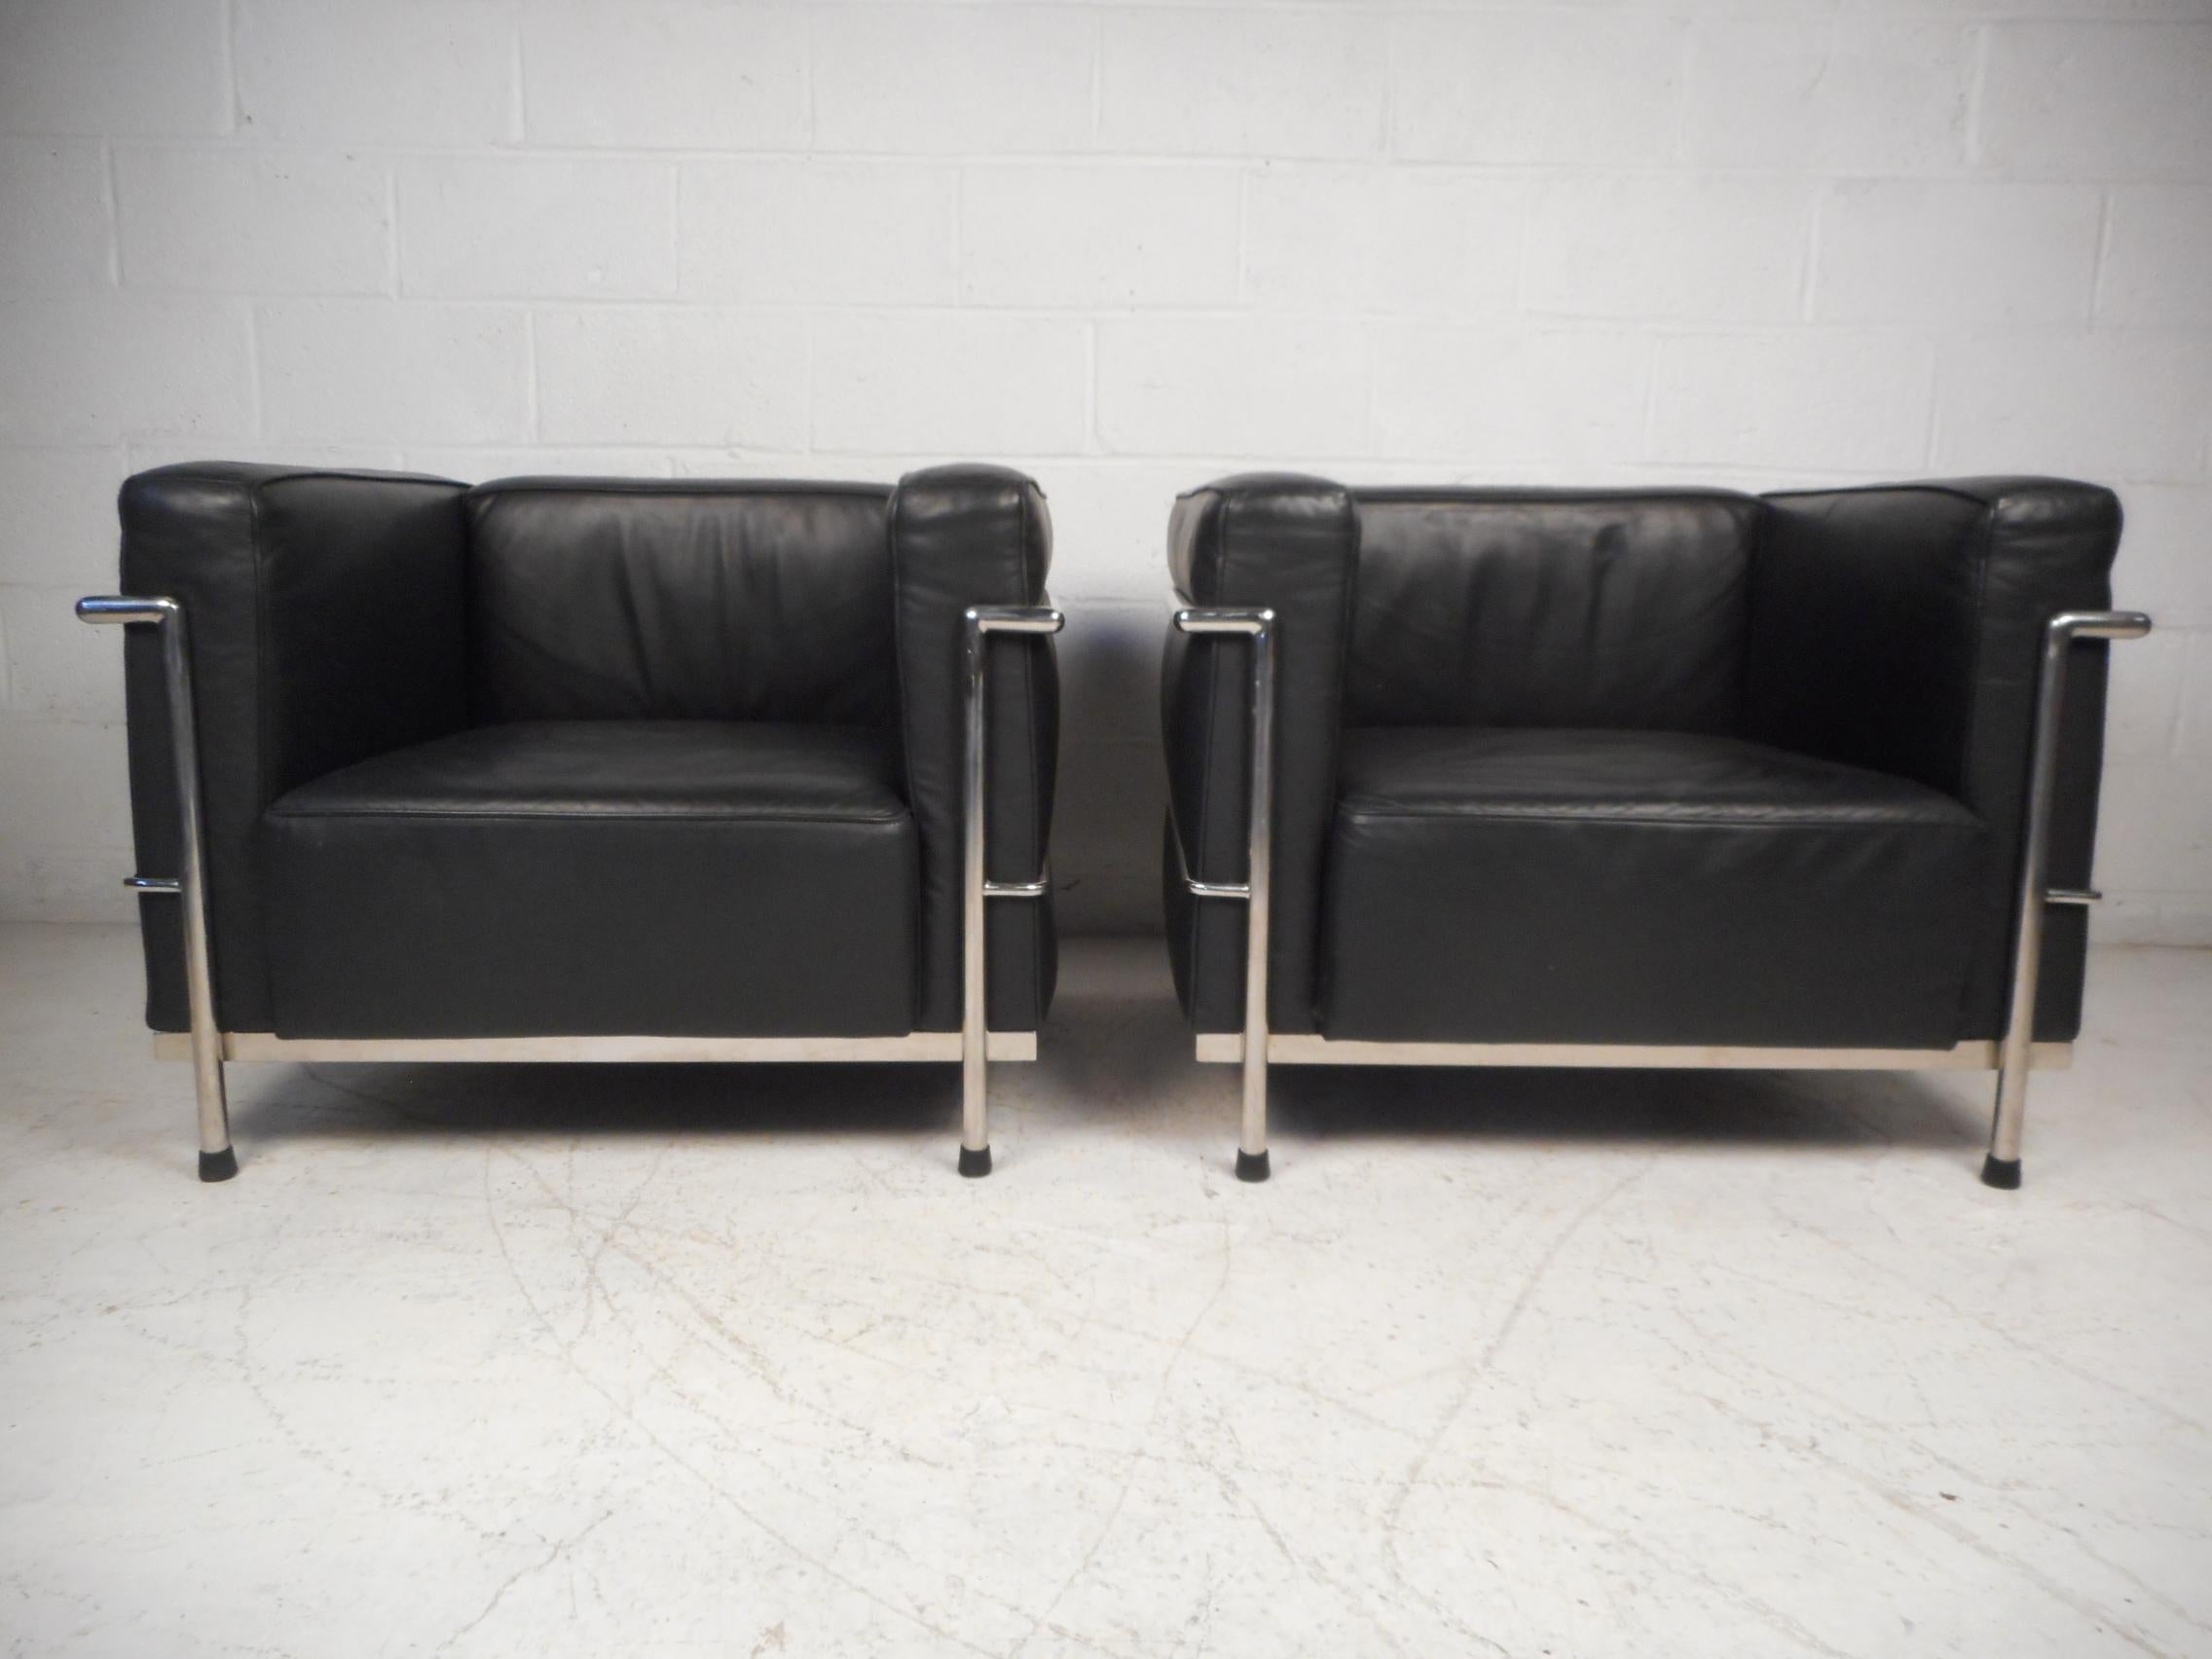 Pair of Corbusier lounge chairs. Spacious seating with comfortable cushions together with an iconic midcentury design. Sure to make an impression in any modern interior. Please confirm item location with dealer (NJ or NY).